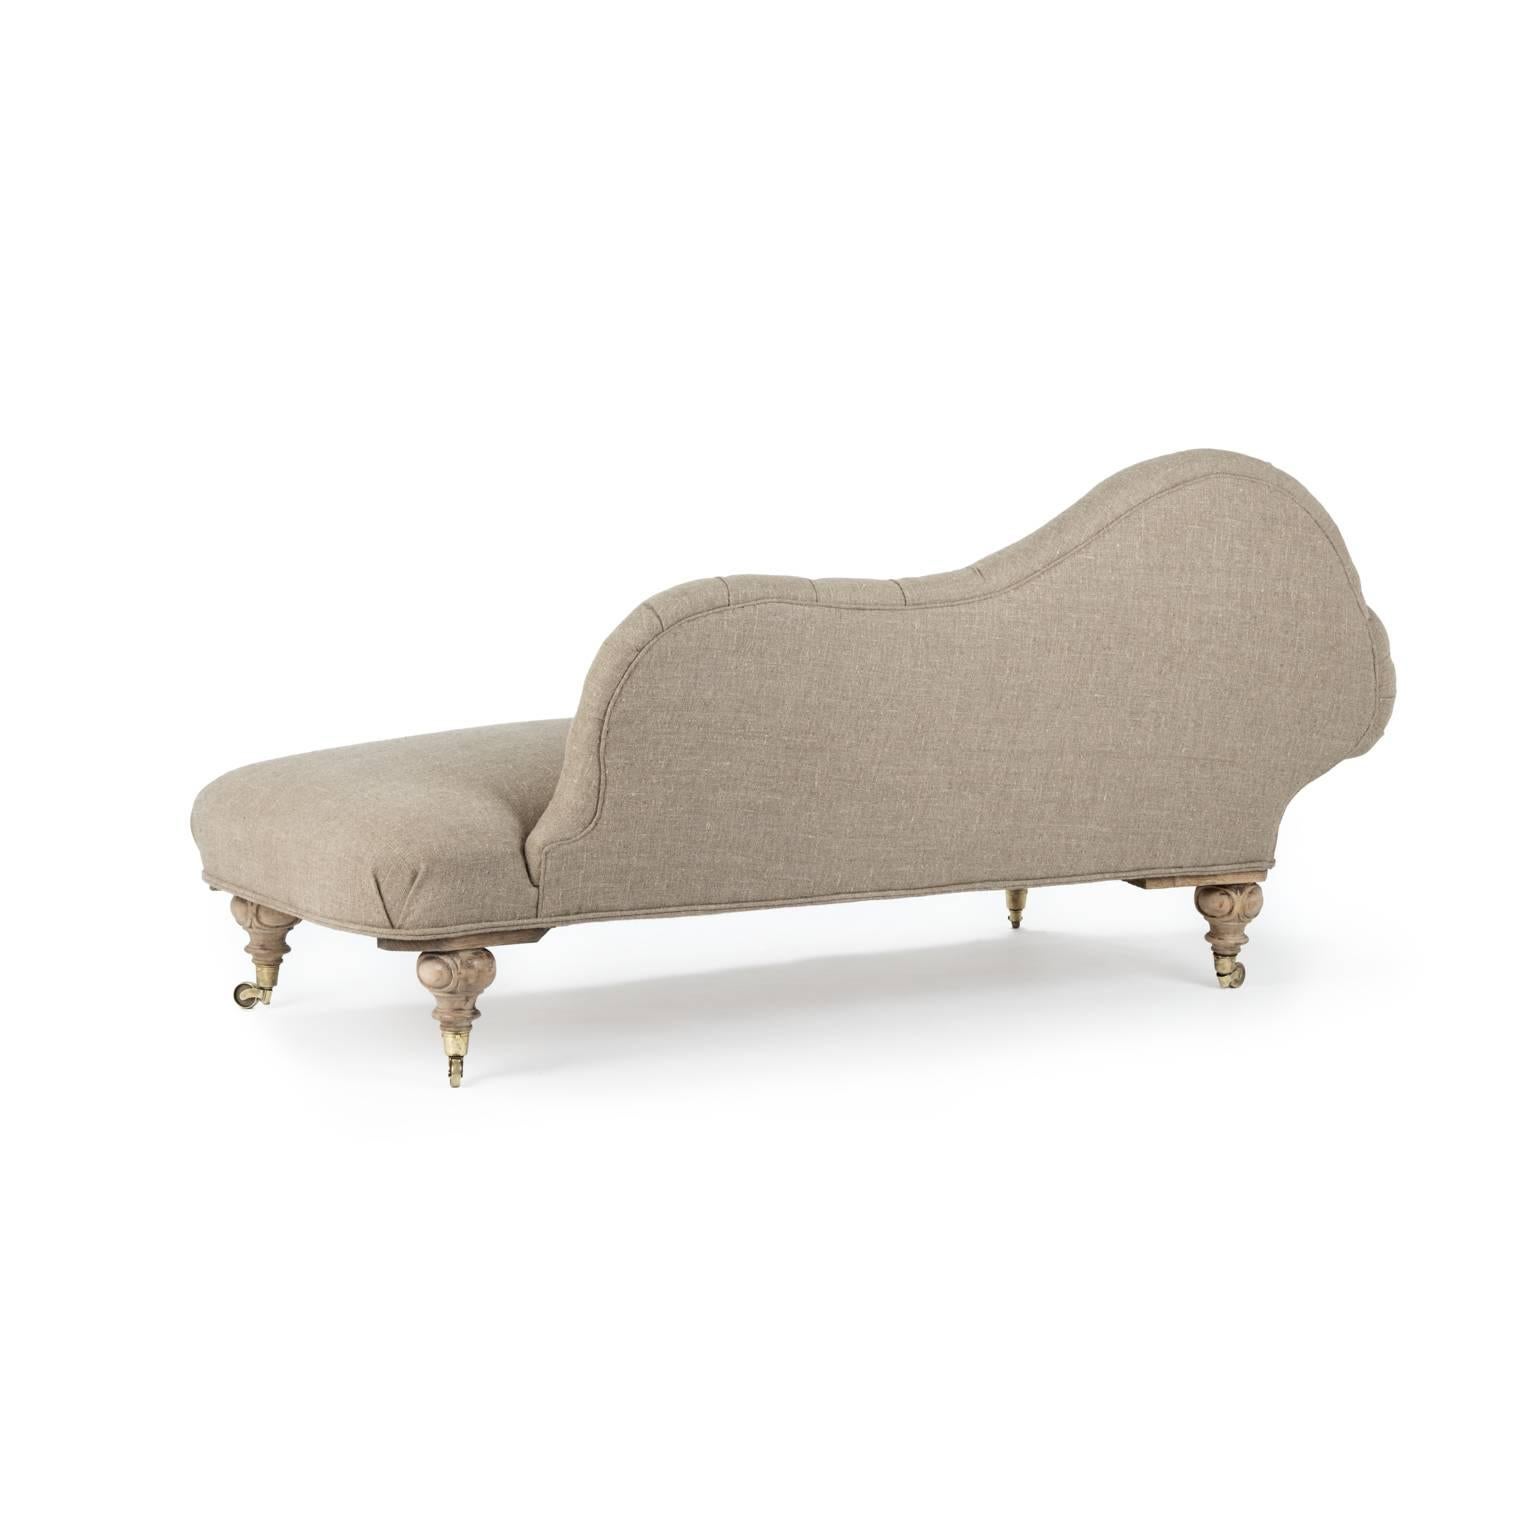 English Eclectic Late Victorian Scroll Arm Tufted Chaise Longue in Organic Flax Linen. For Sale